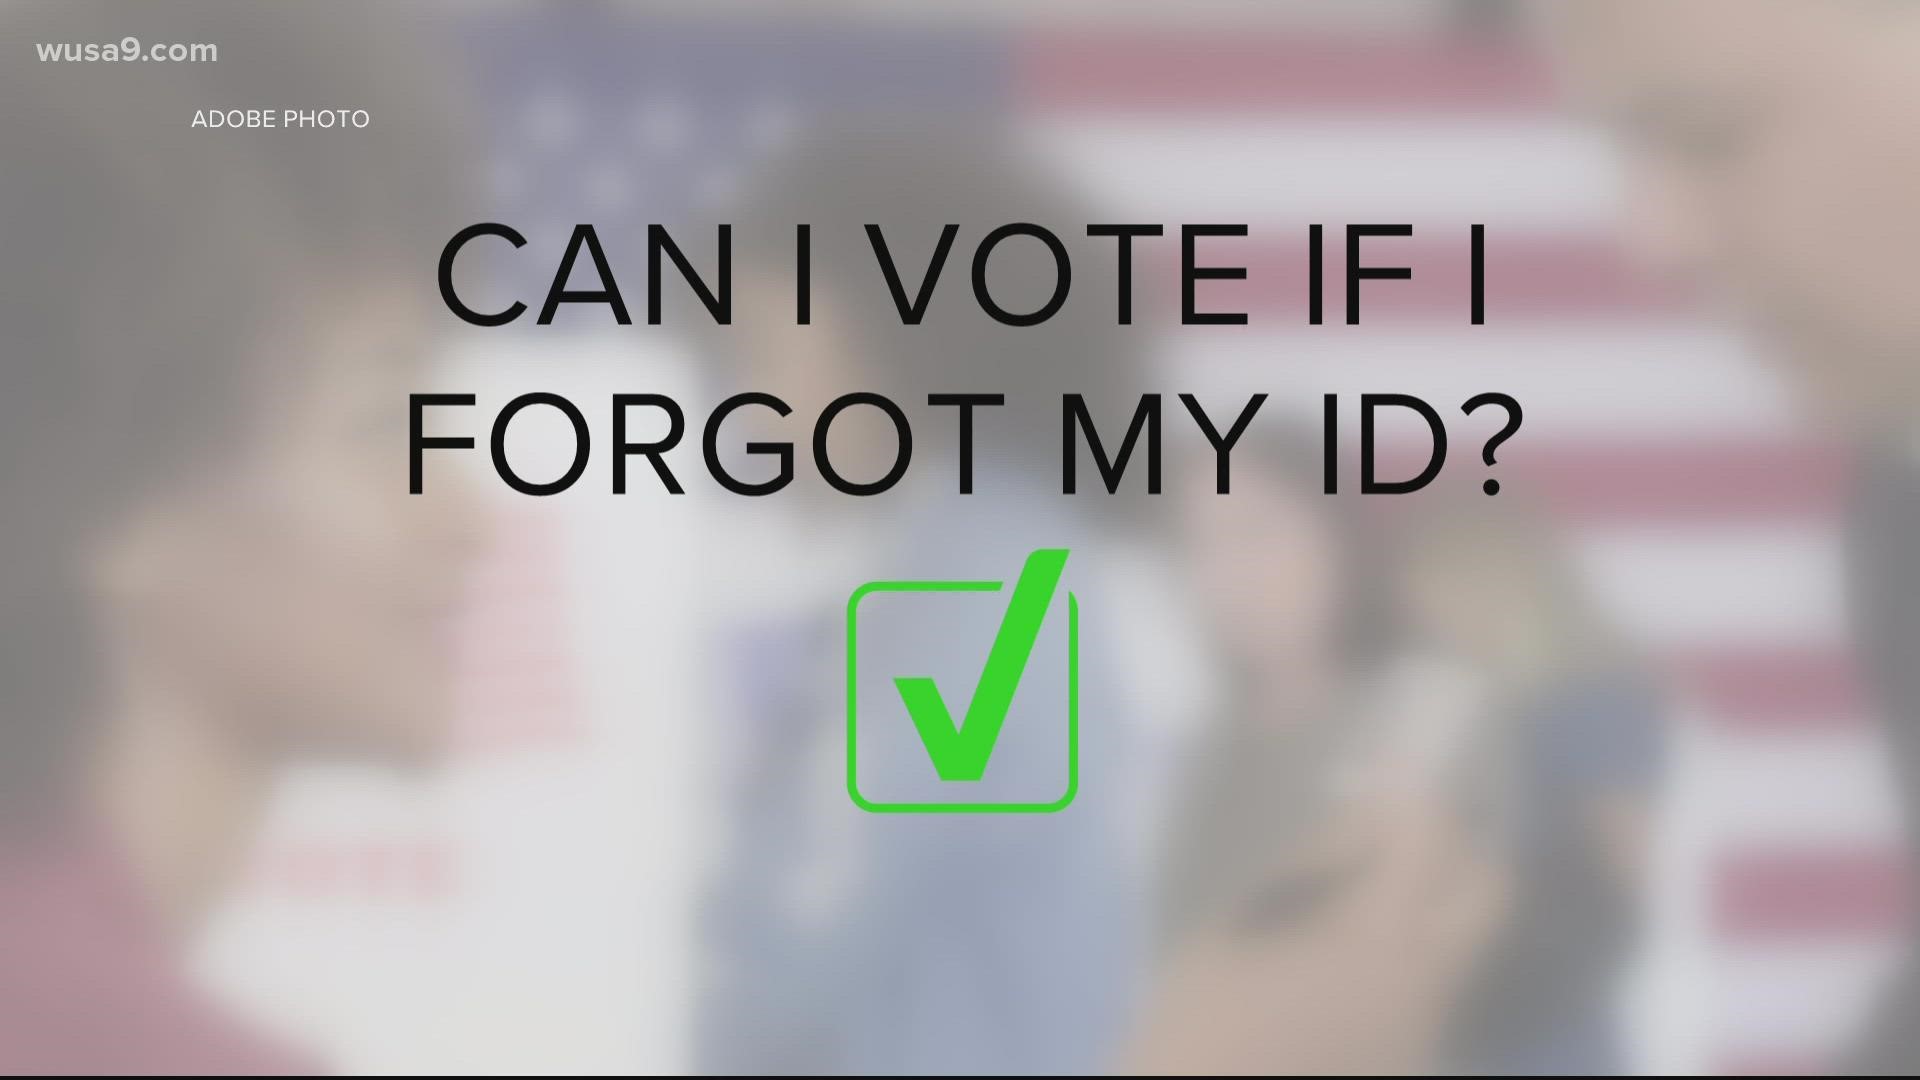 In Virginia, you either need a valid form of ID or you can sign an ID Confirmation Statement. Otherwise, you'll have to vote provisionally.